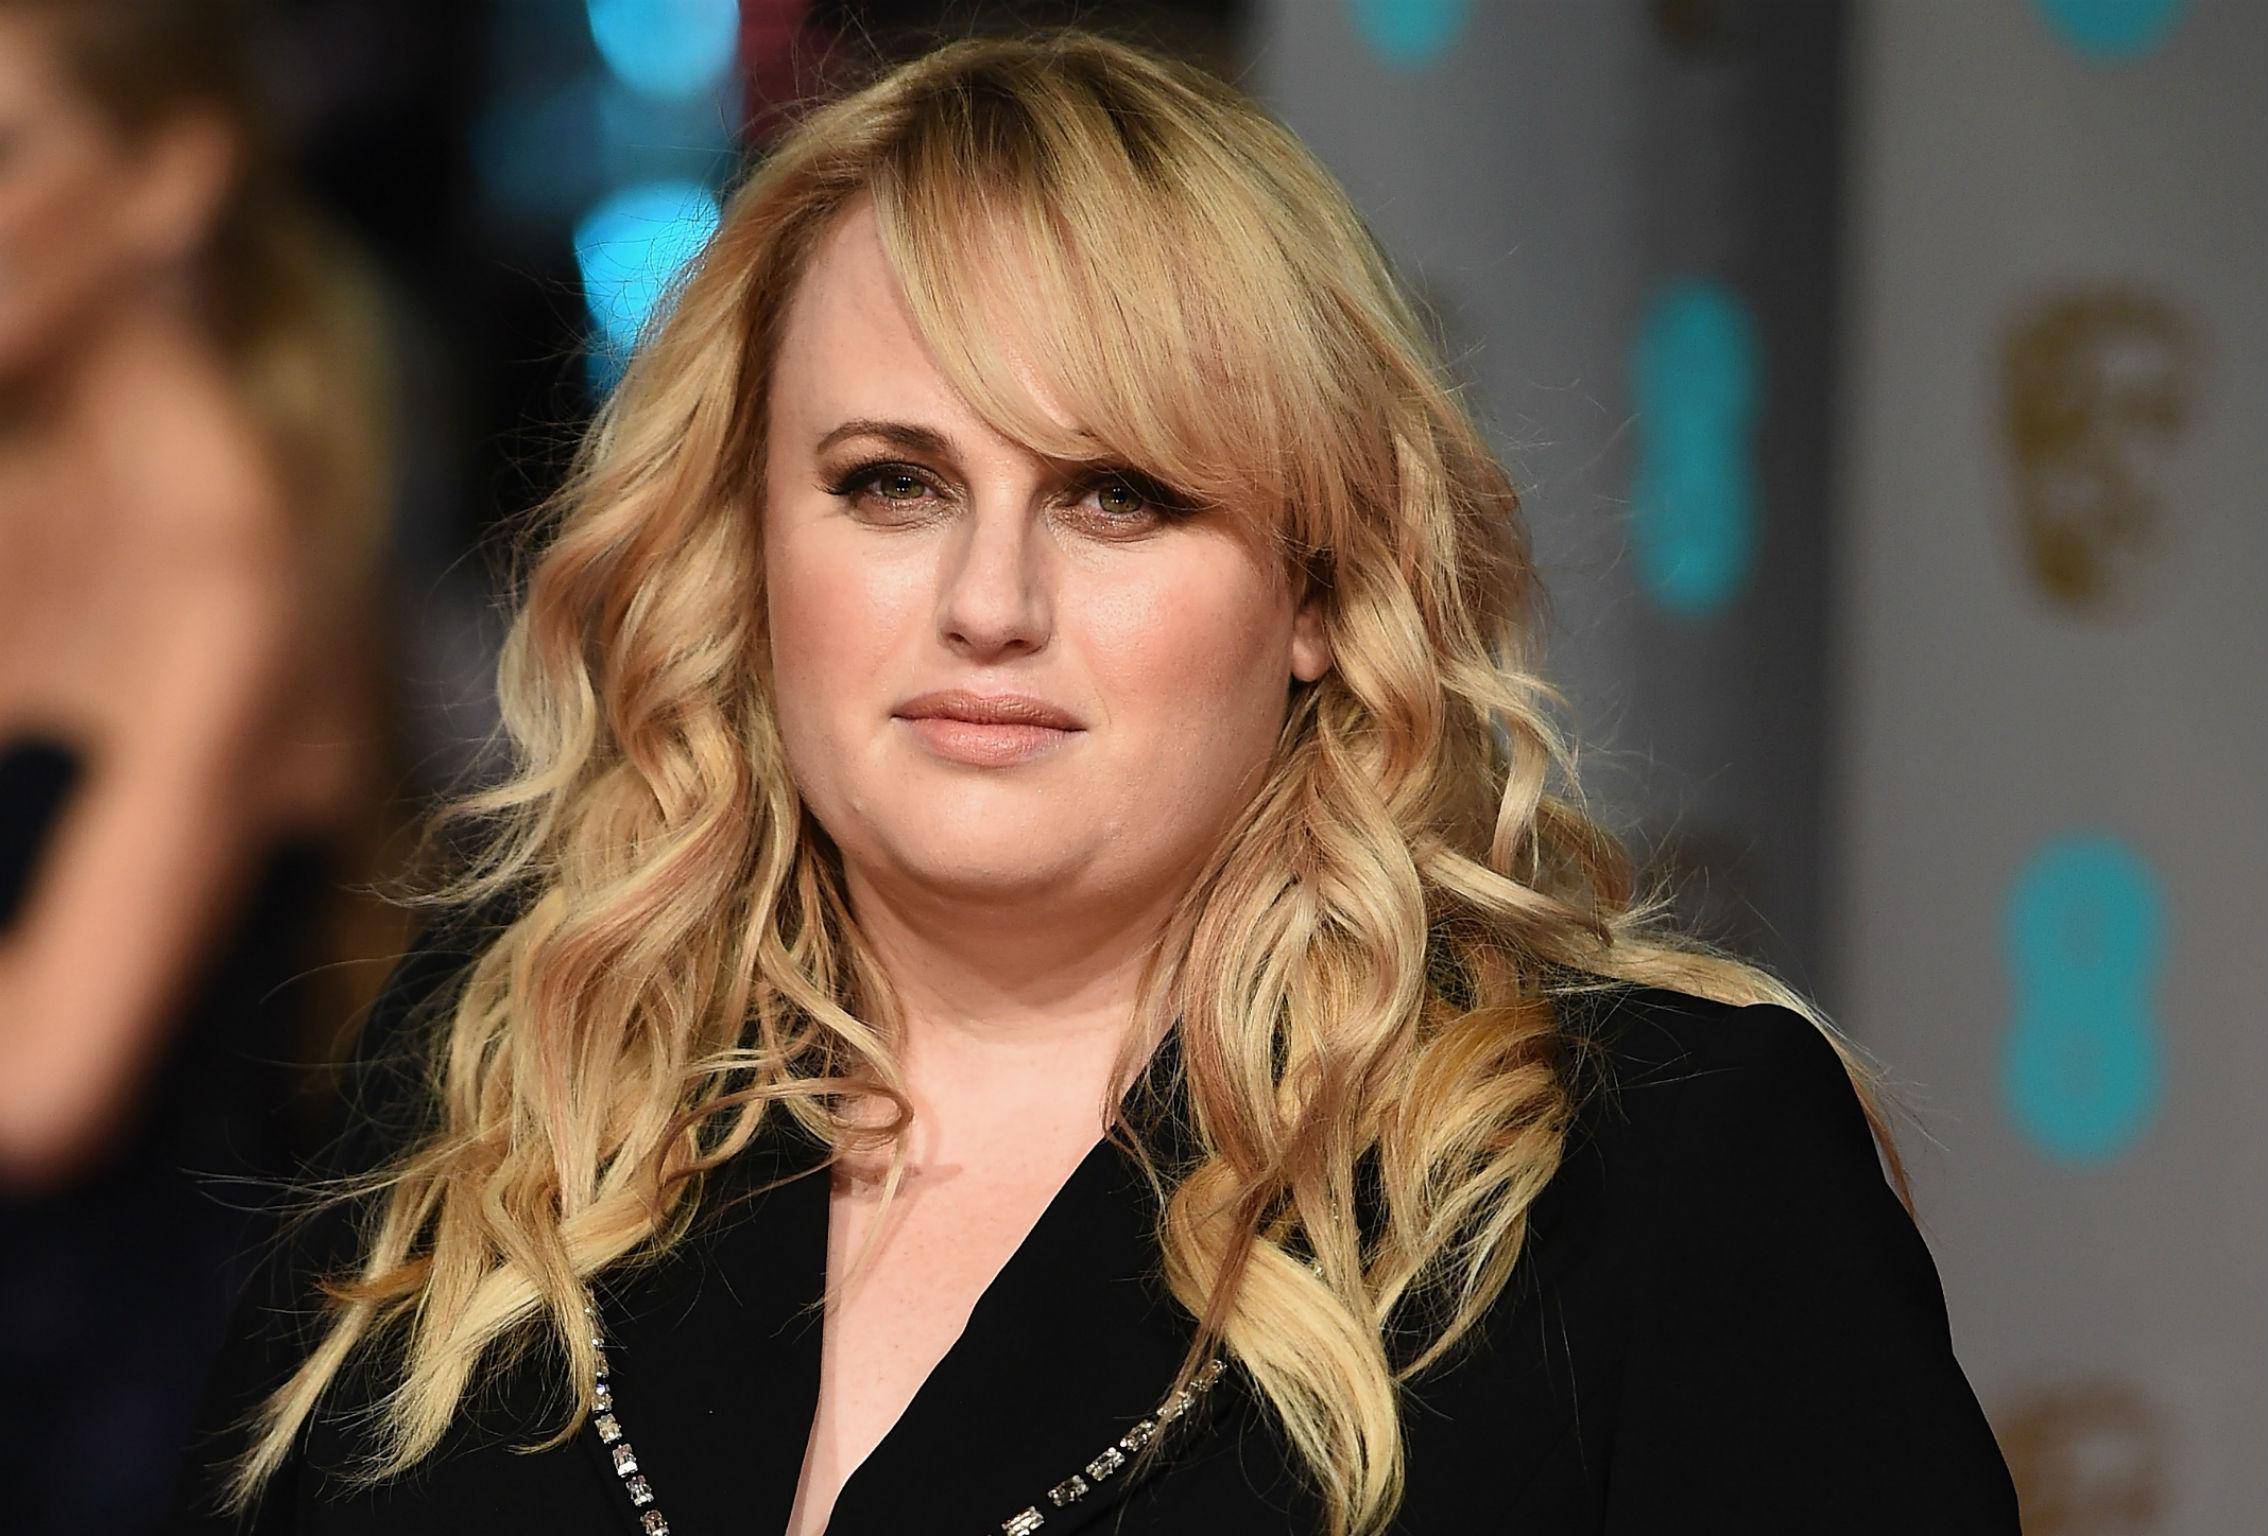 Rebel Wilson claims comedy career begun taking off when she gained